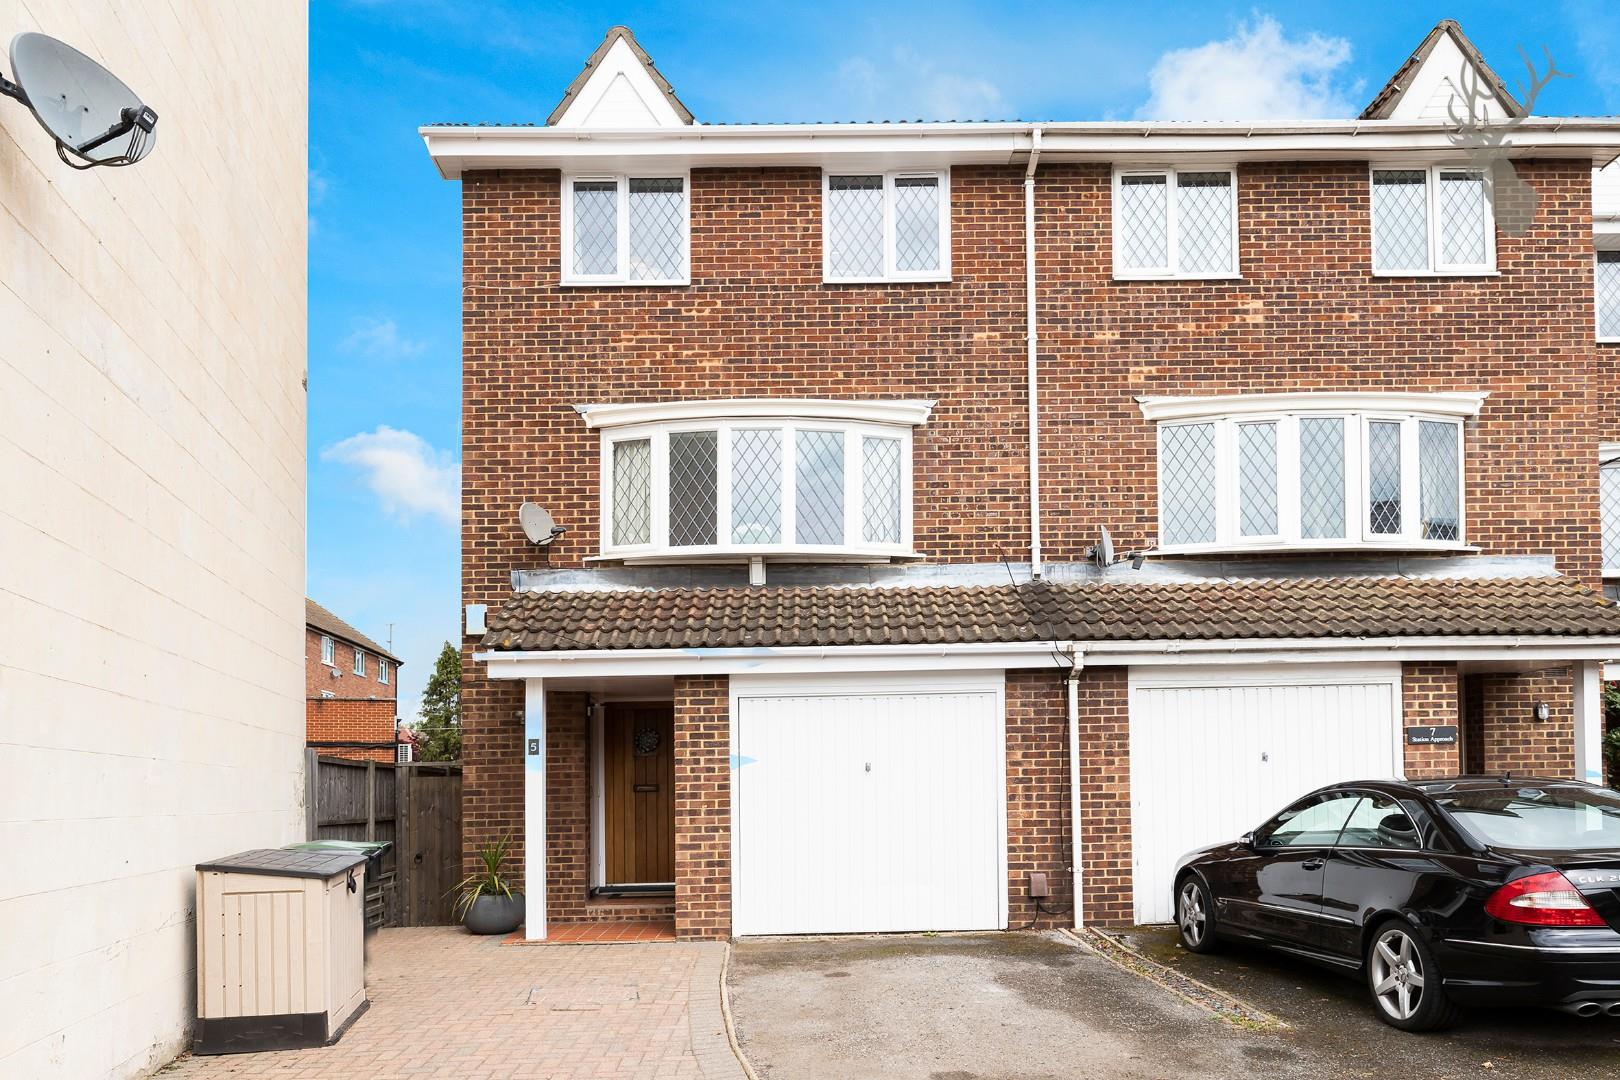 Similar Property: House - End Terrace in Theydon Bois